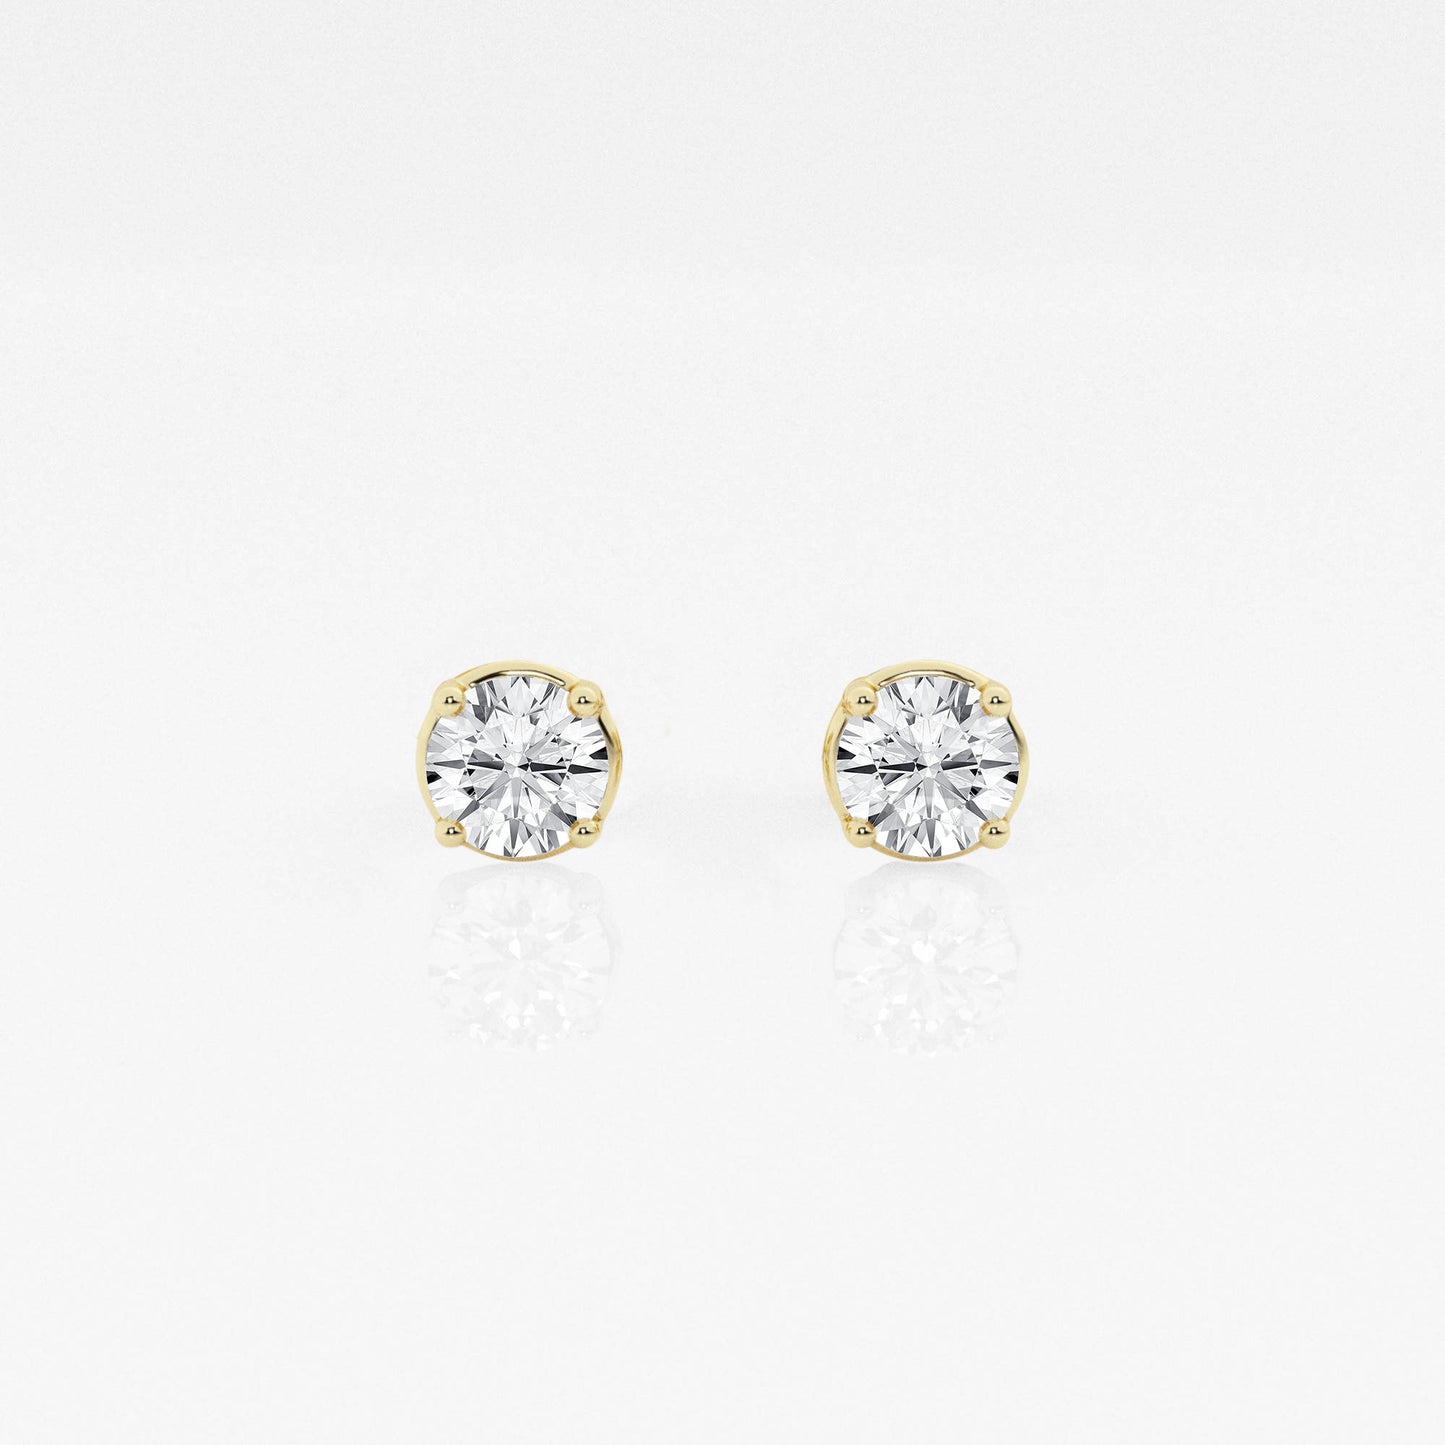 Round Solitaire earrings with four prongs